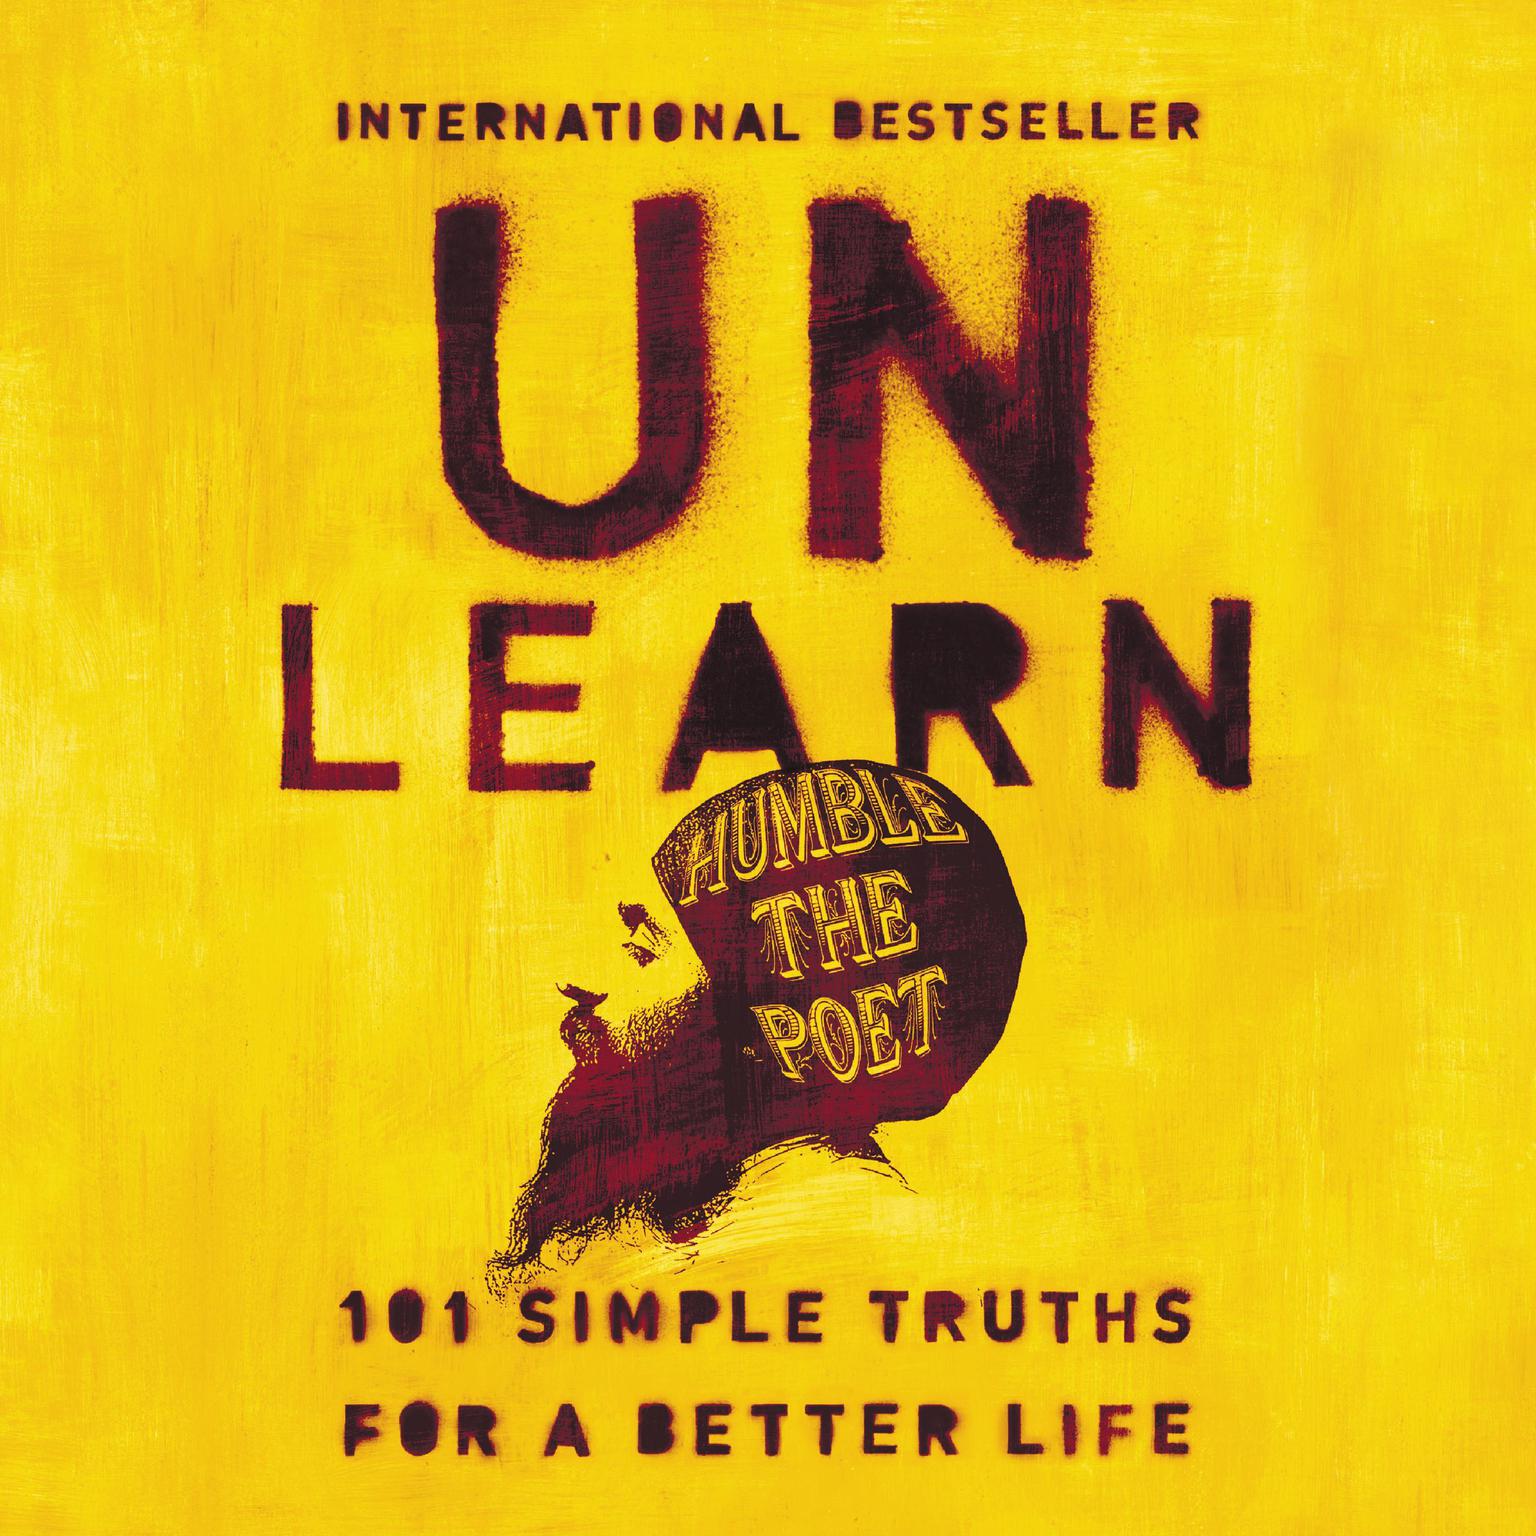 Unlearn: 101 Simple Truths for a Better Life Audiobook, by Humble the Poet